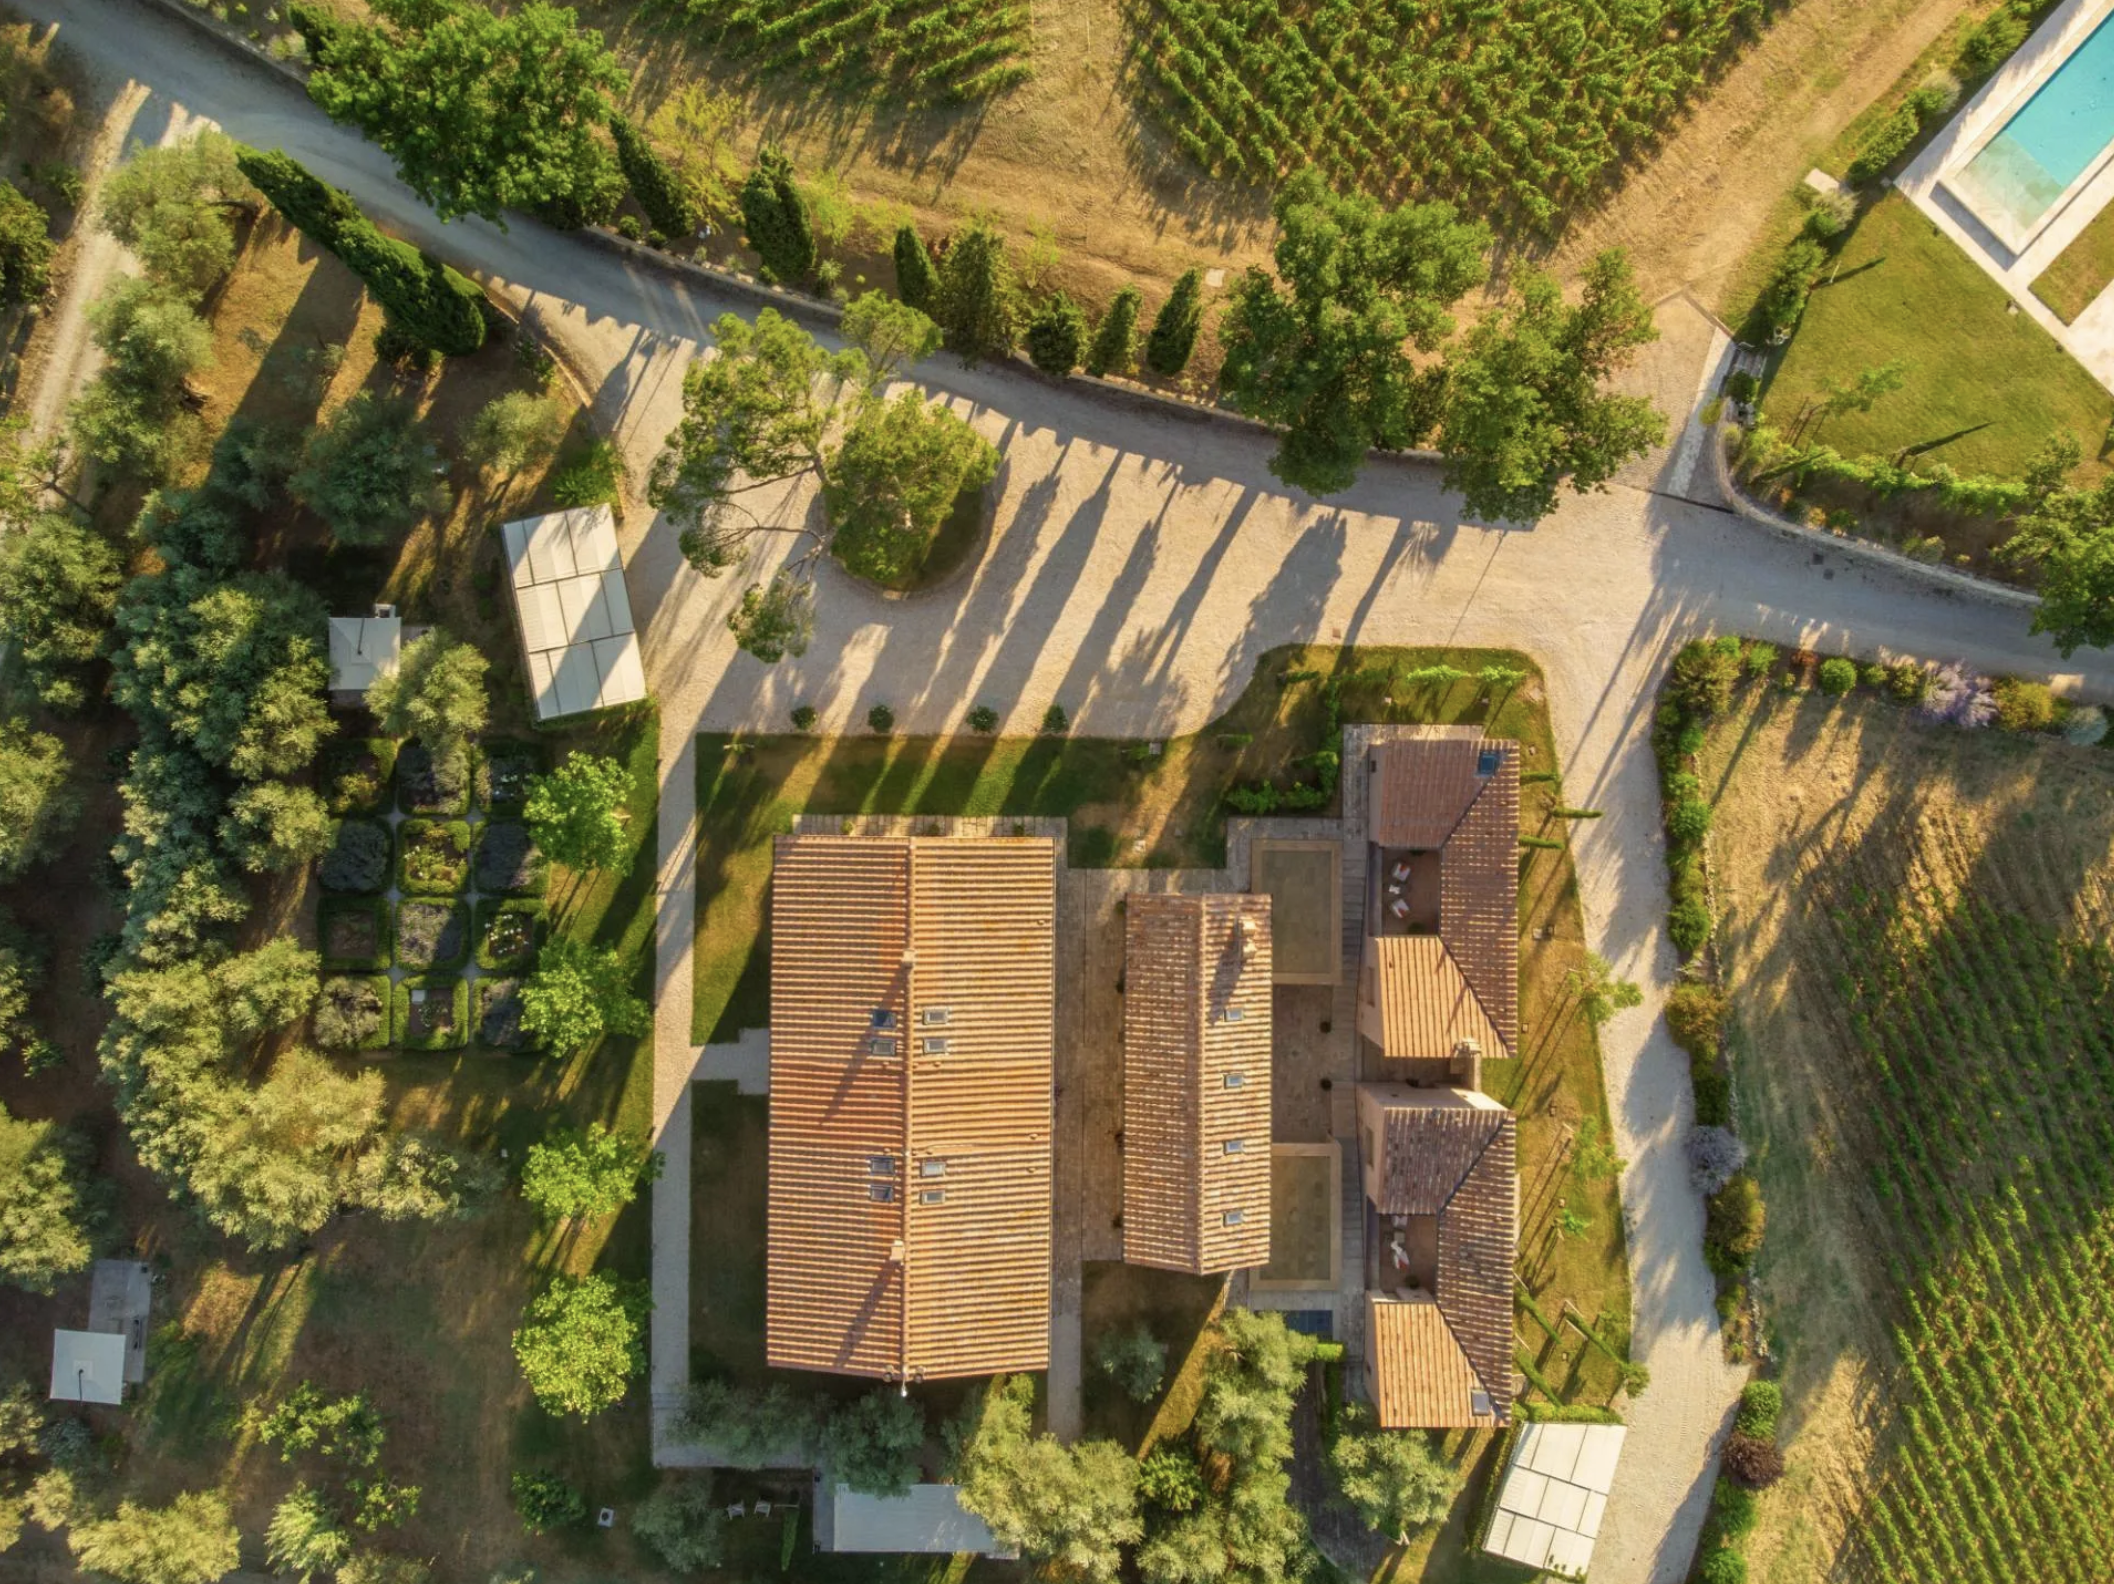 Francis York Villa Travertino: Luxury Villa and Wine Estate in the Heart of Tuscany 5.png